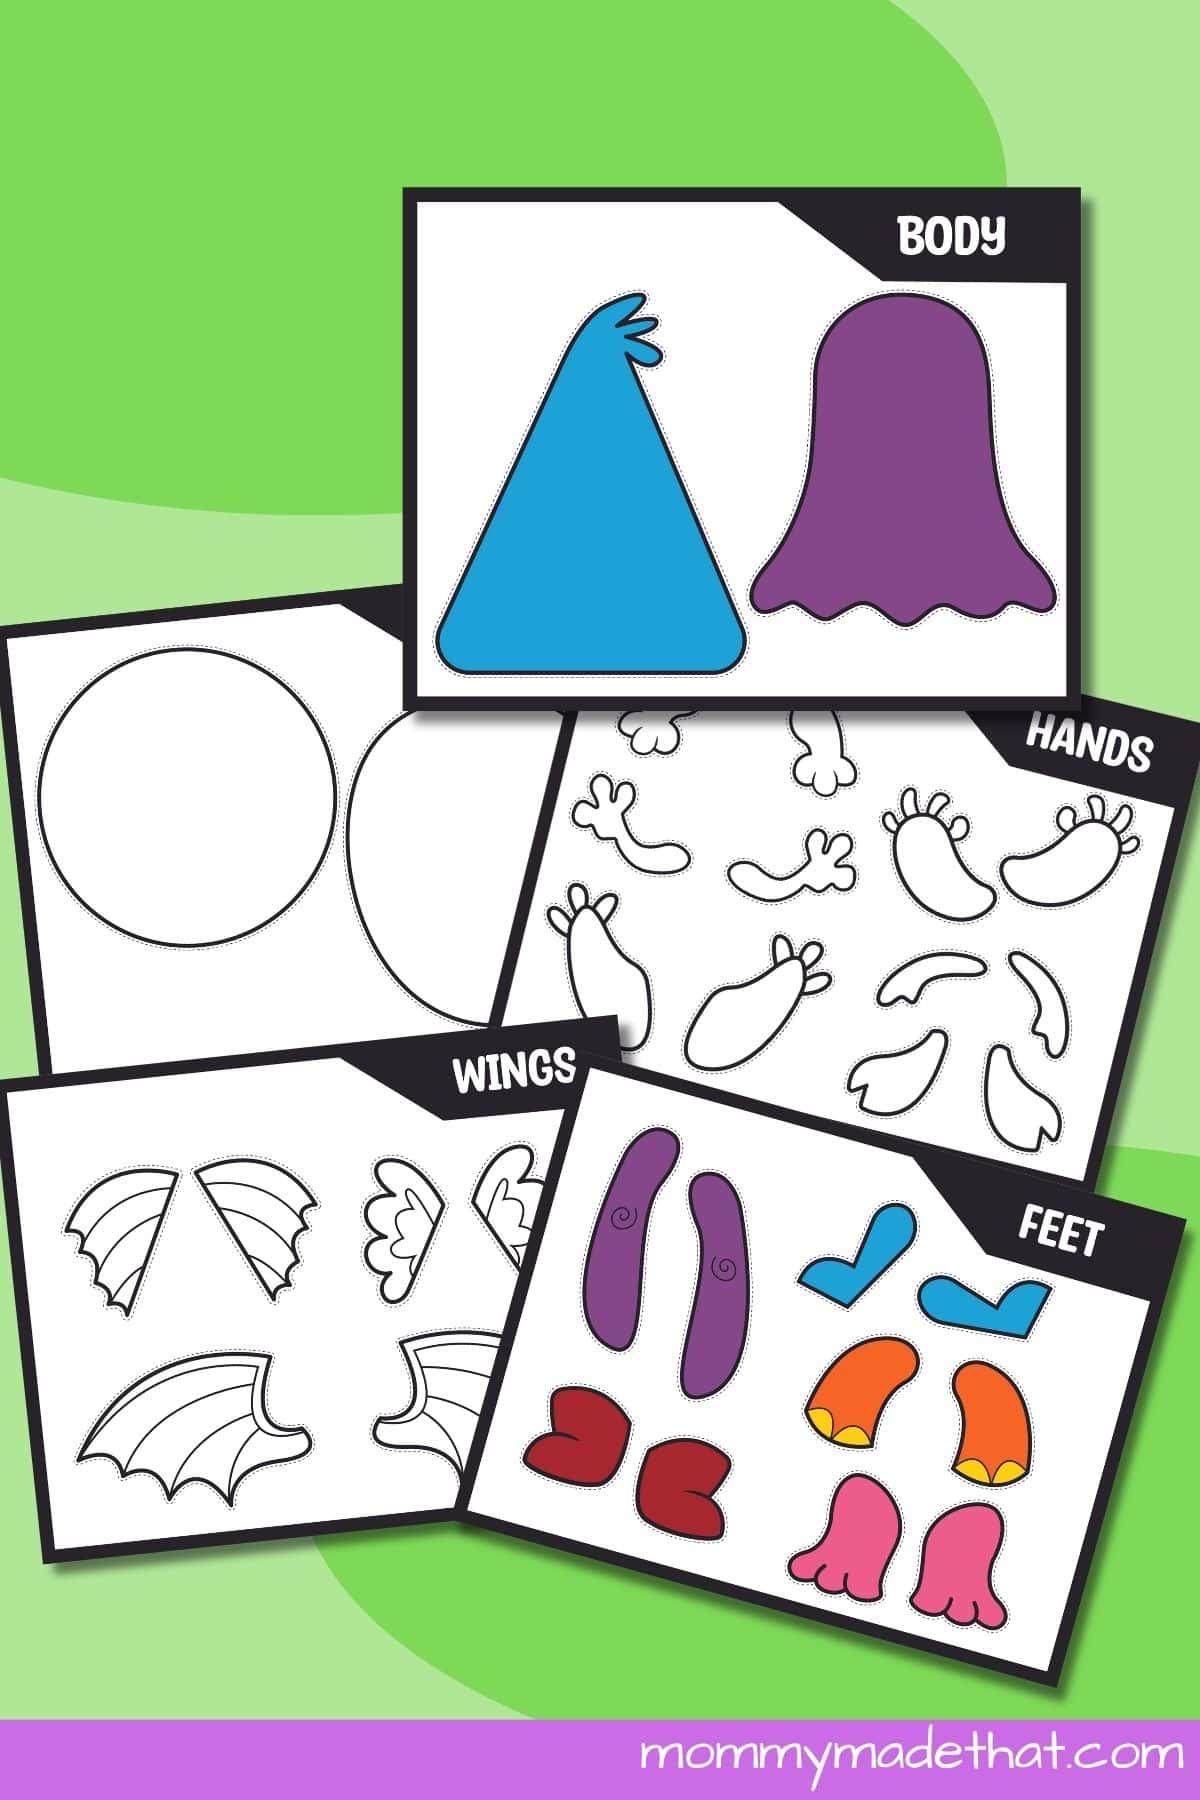 pages from the make a monster printable pack